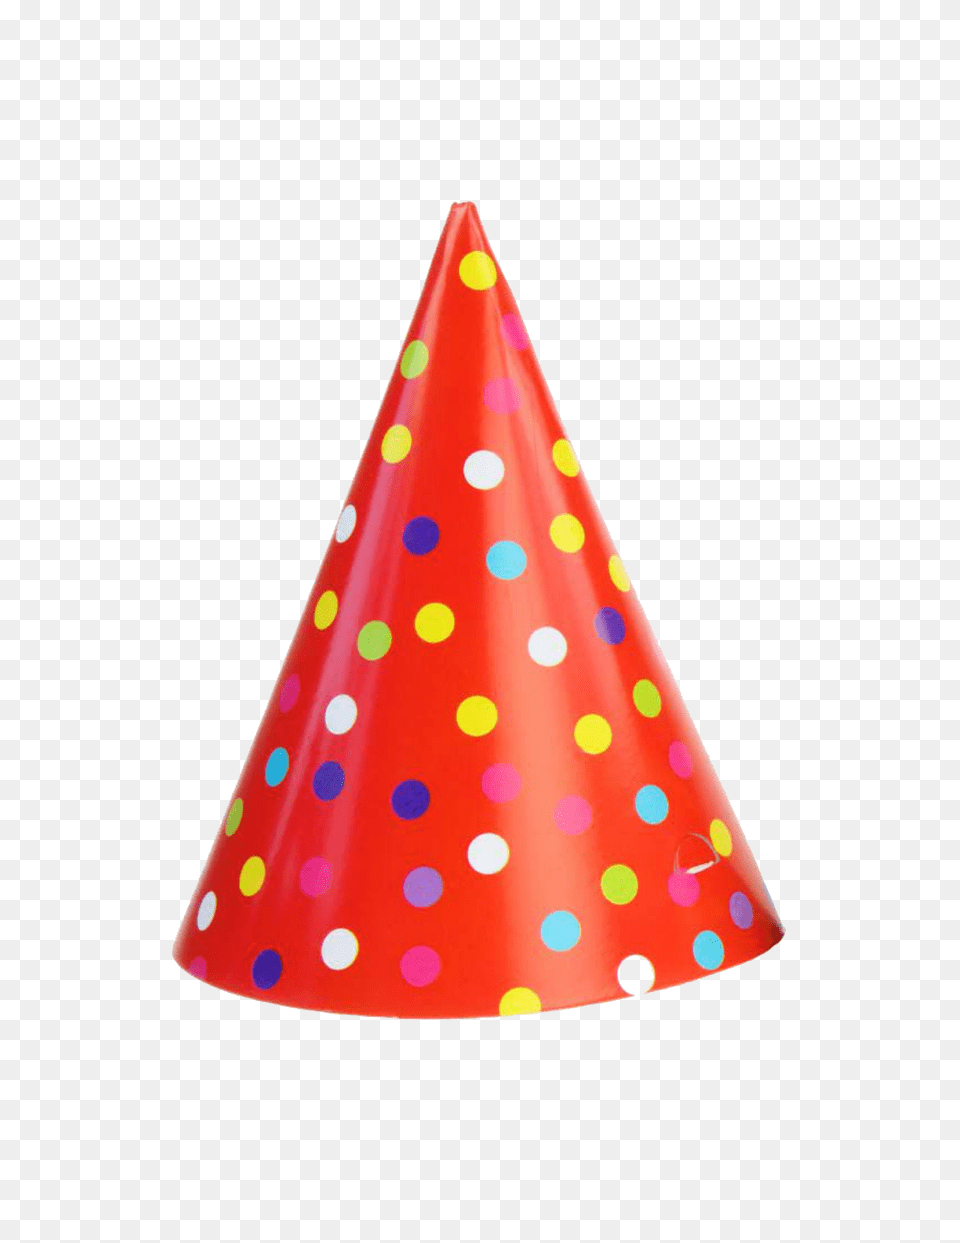 Party Hat File Vector Clipart Psd Birthday Party Hat, Clothing, Party Hat Free Transparent Png